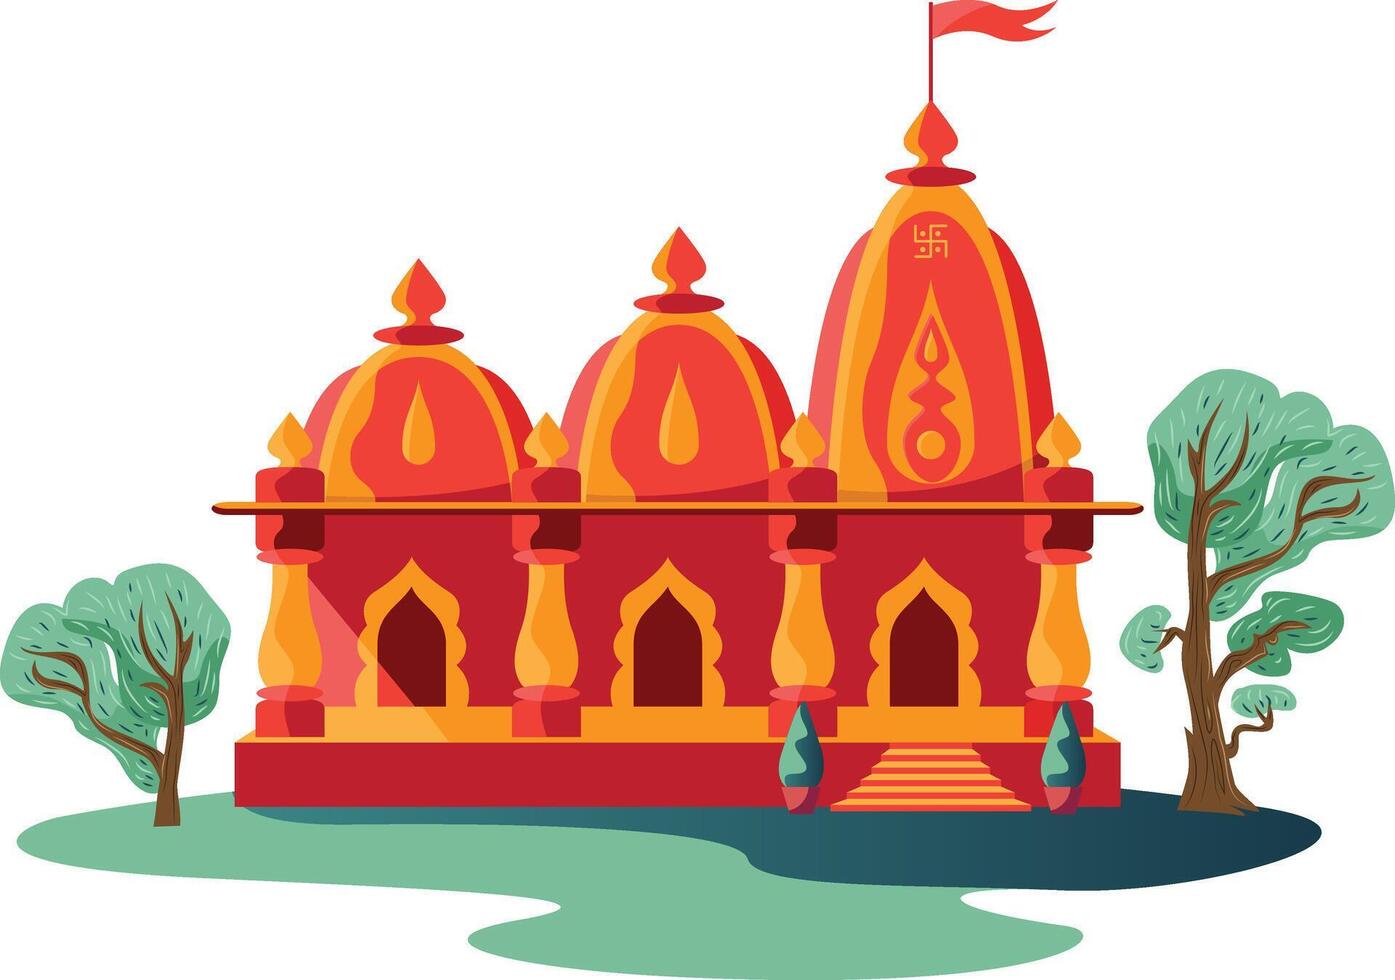 Hindu spiritual temple with flag and trees isolated vector